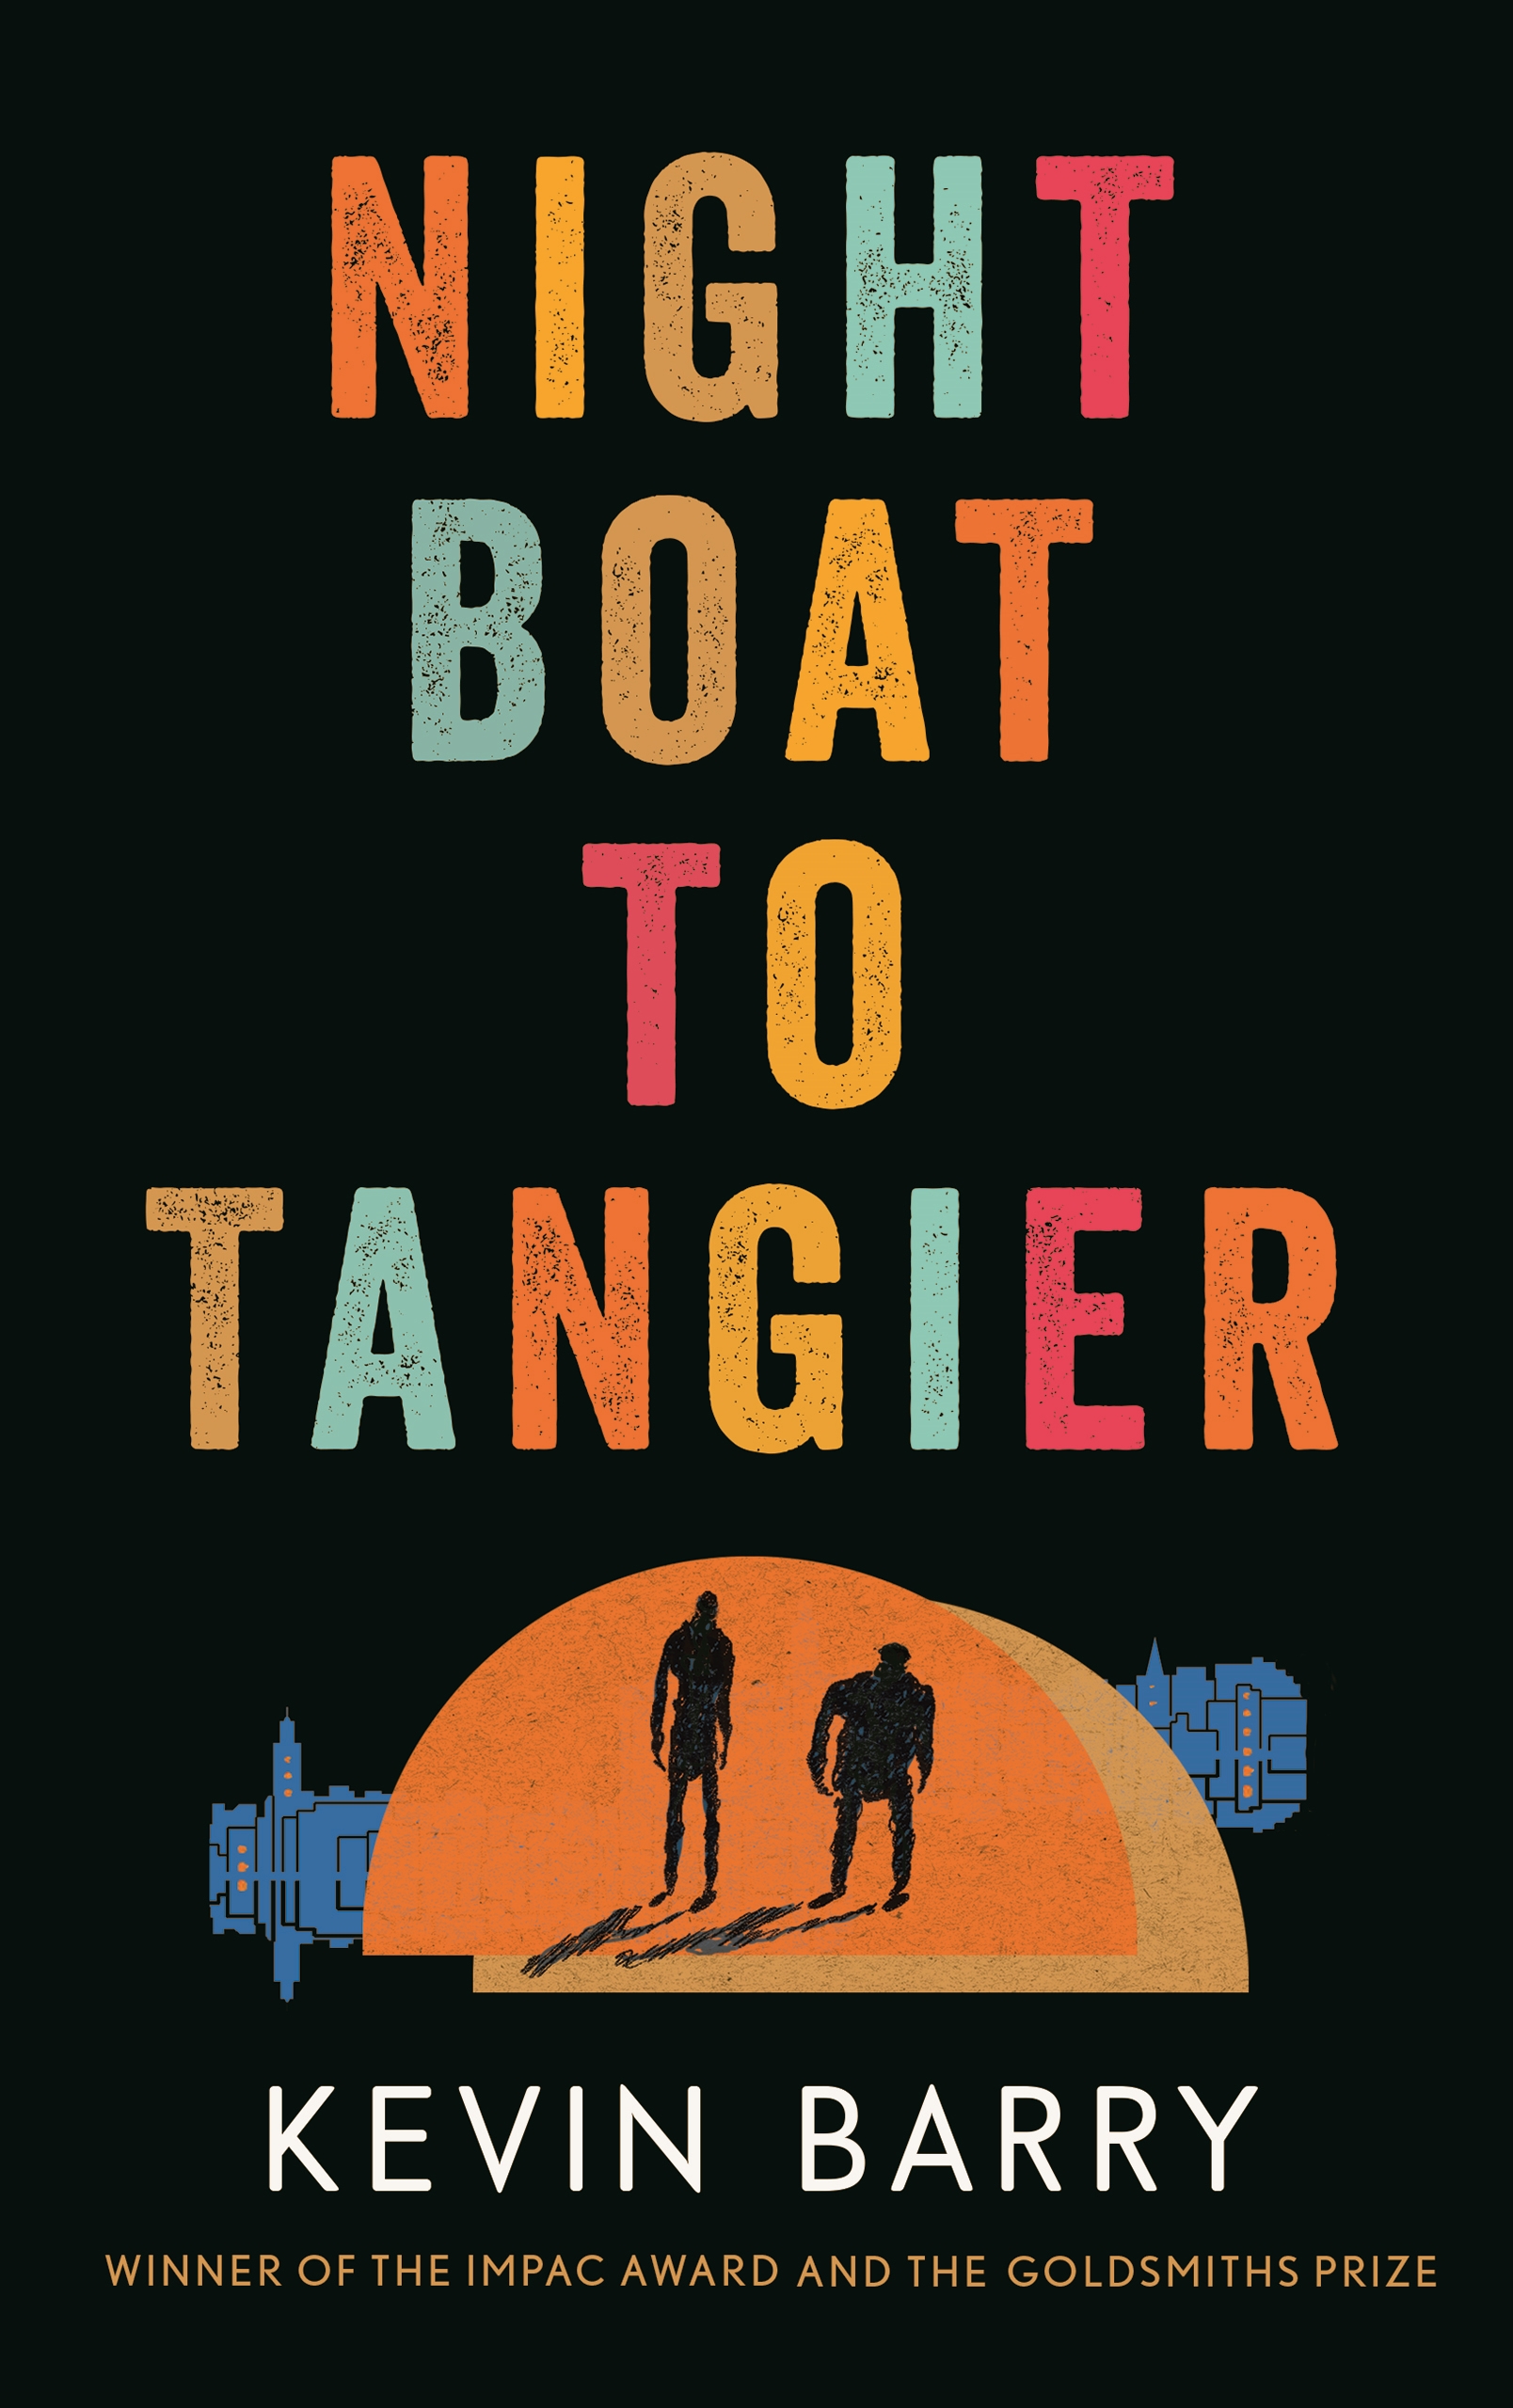 Night Boat To Tangier by Kevin Barry